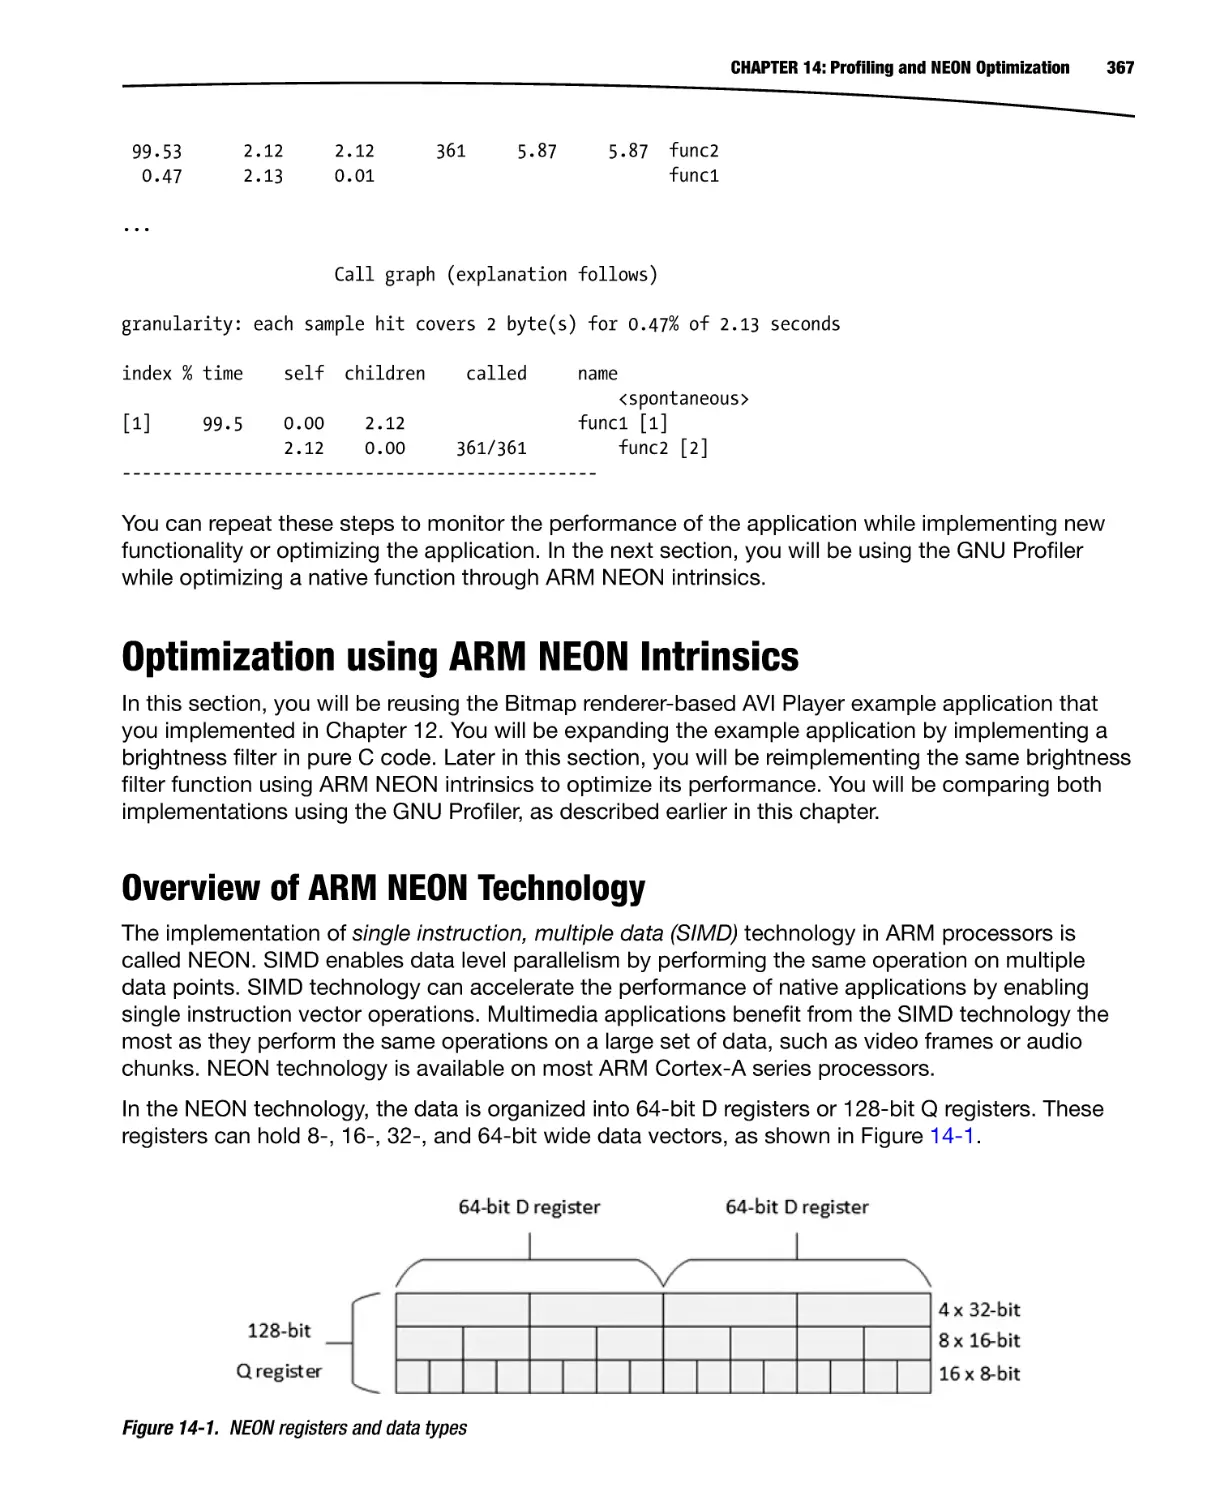 Optimization using ARM NEON Intrinsics
Overview of ARM NEON Technology